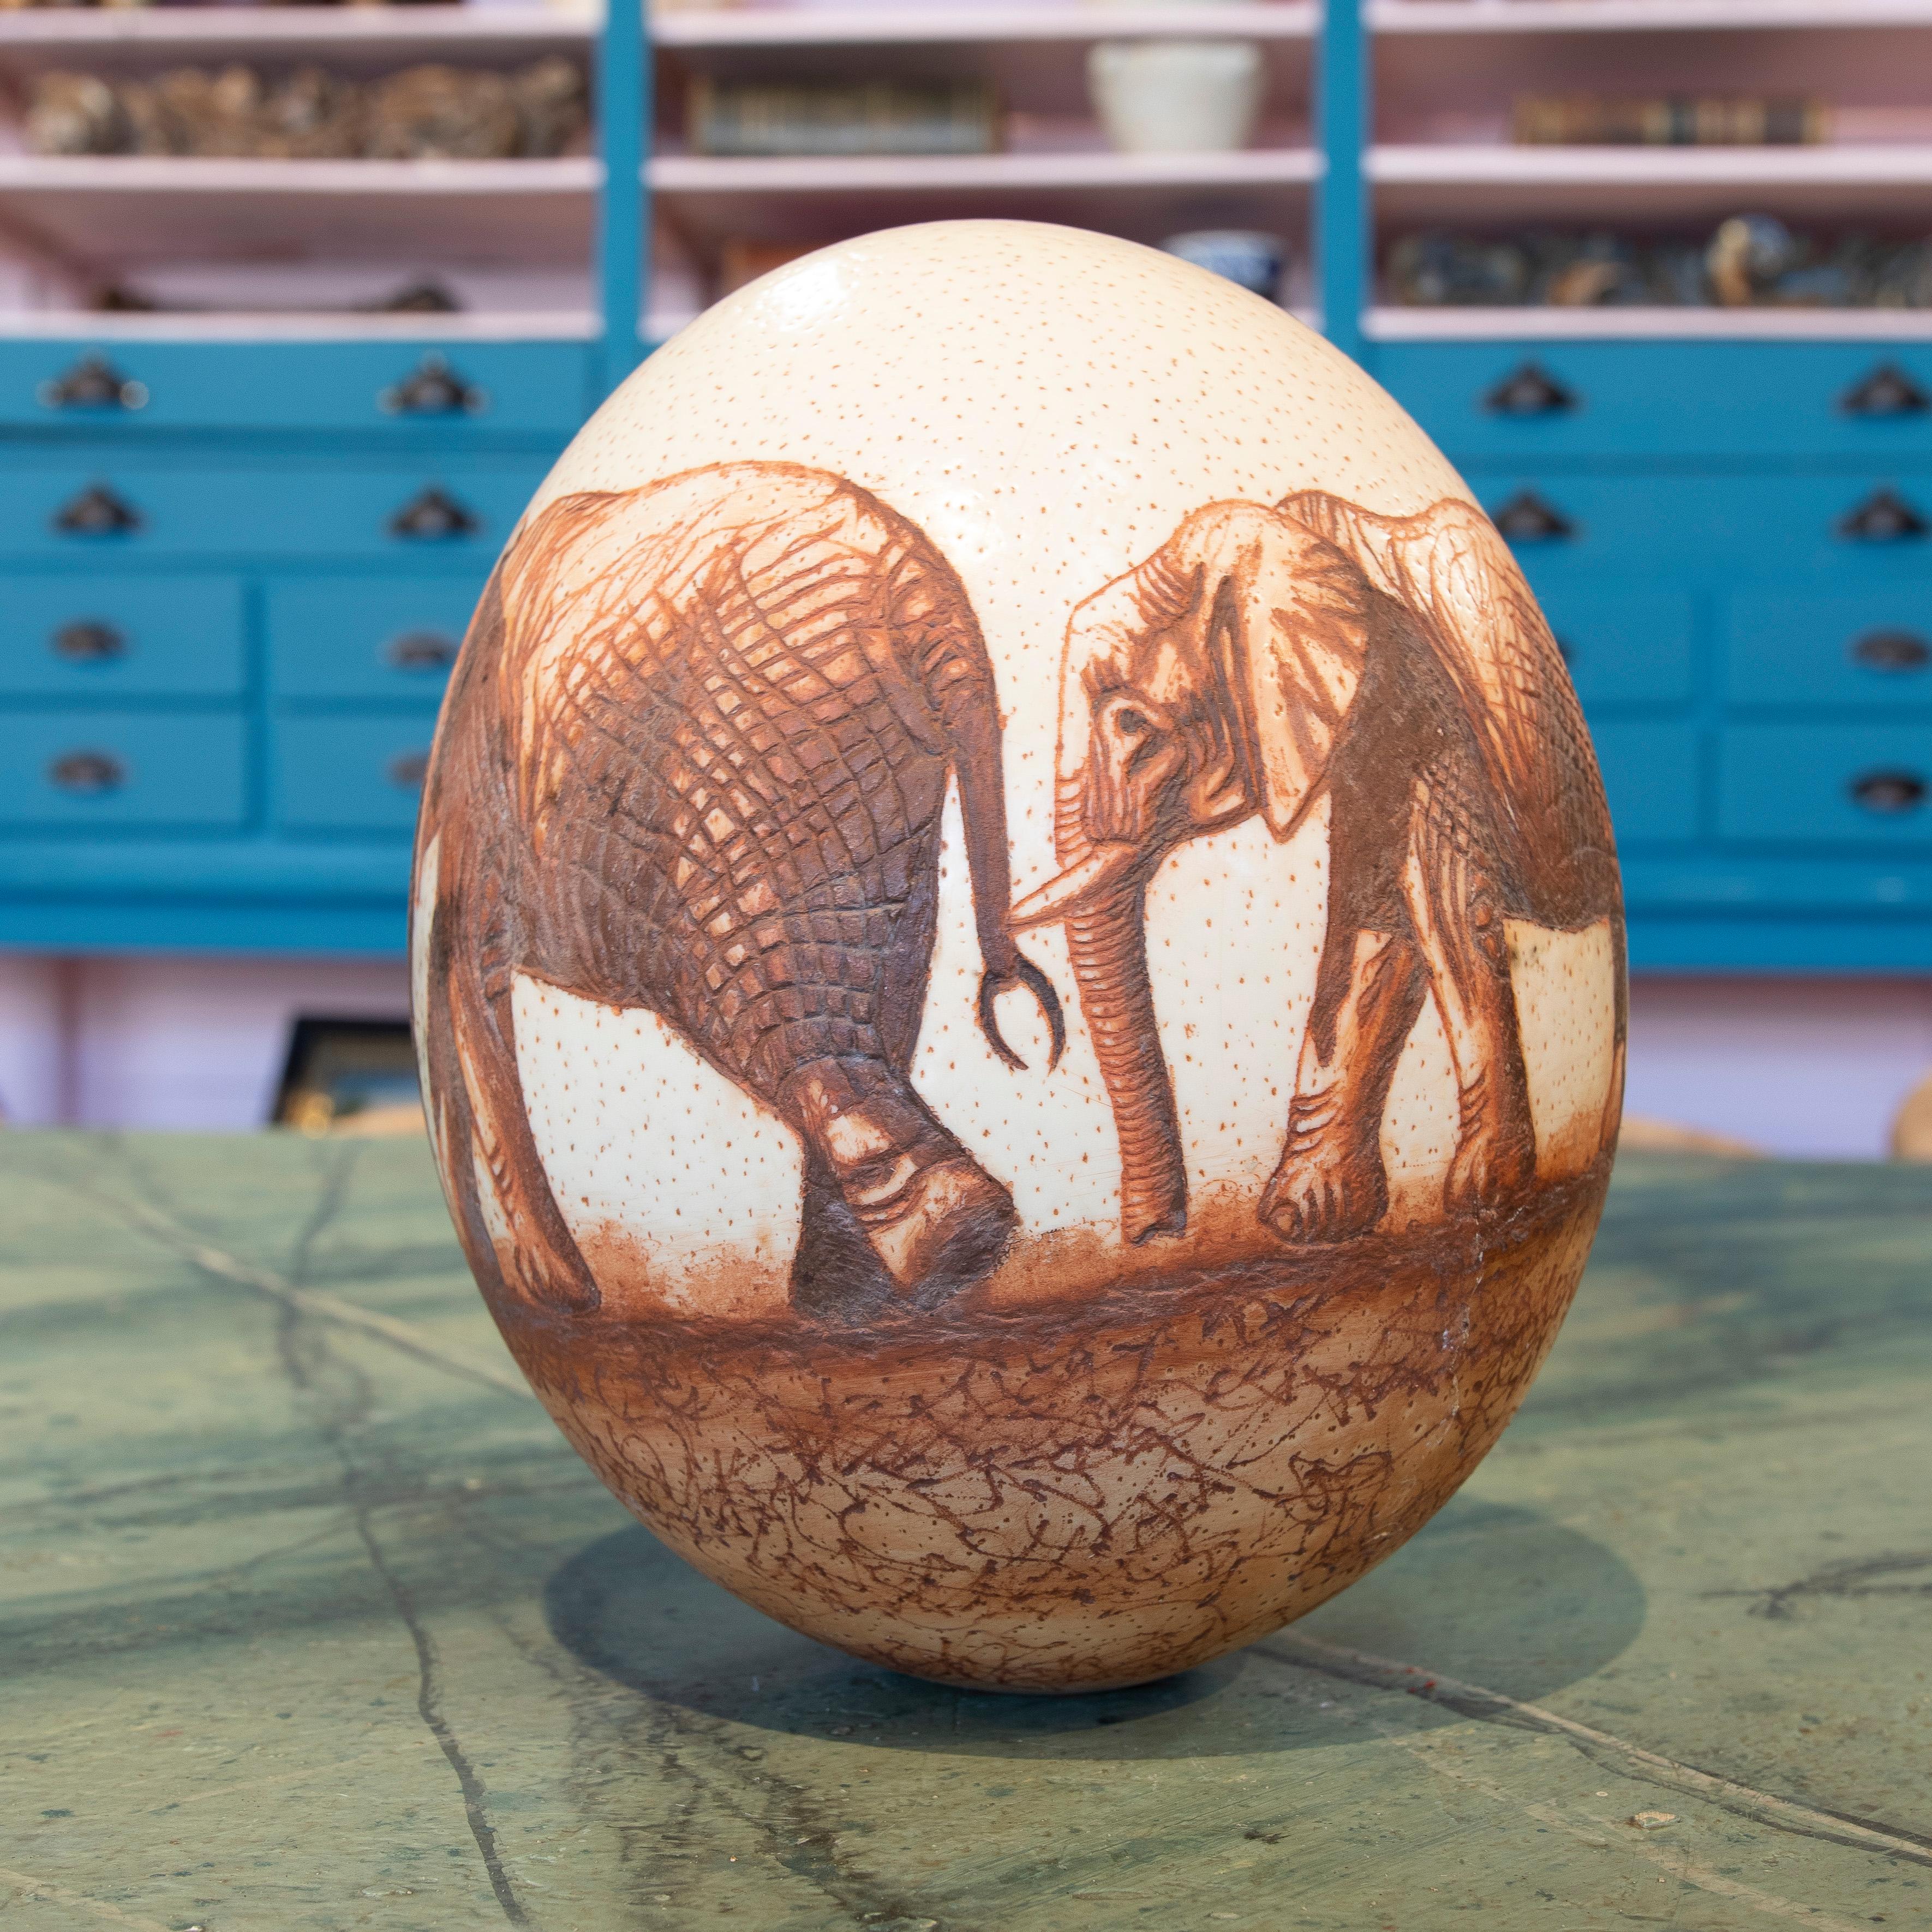 Original 1950s South African scrimshaw ostrich egg by late chief Sipho Ndlvu depicting a pair of elephants.